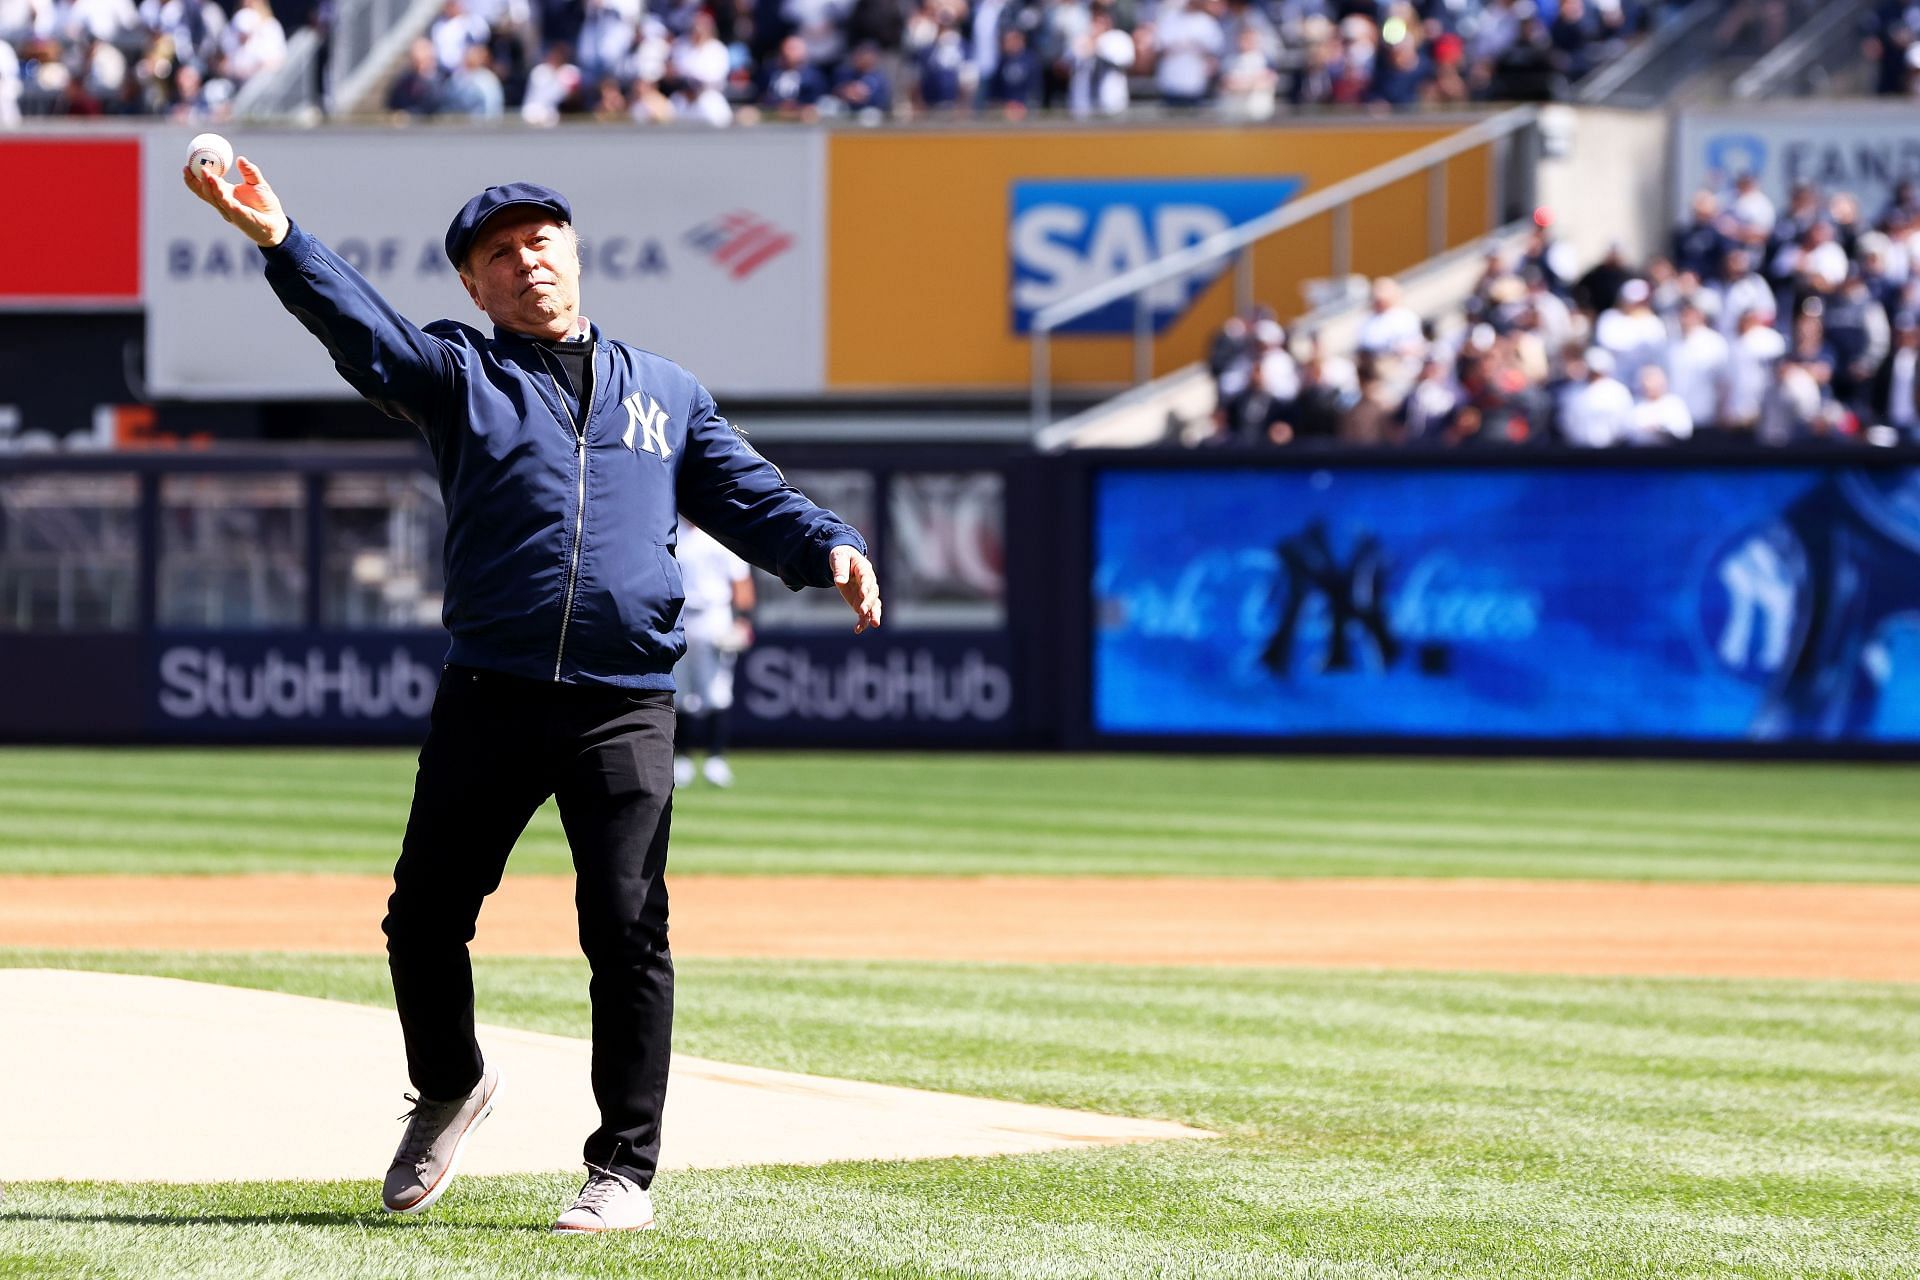 Actor Billy Crystal threw out the first pitch prior to the start of the game between the New York Yankees and the Boston Red Sox at Yankee Stadium on April 8.